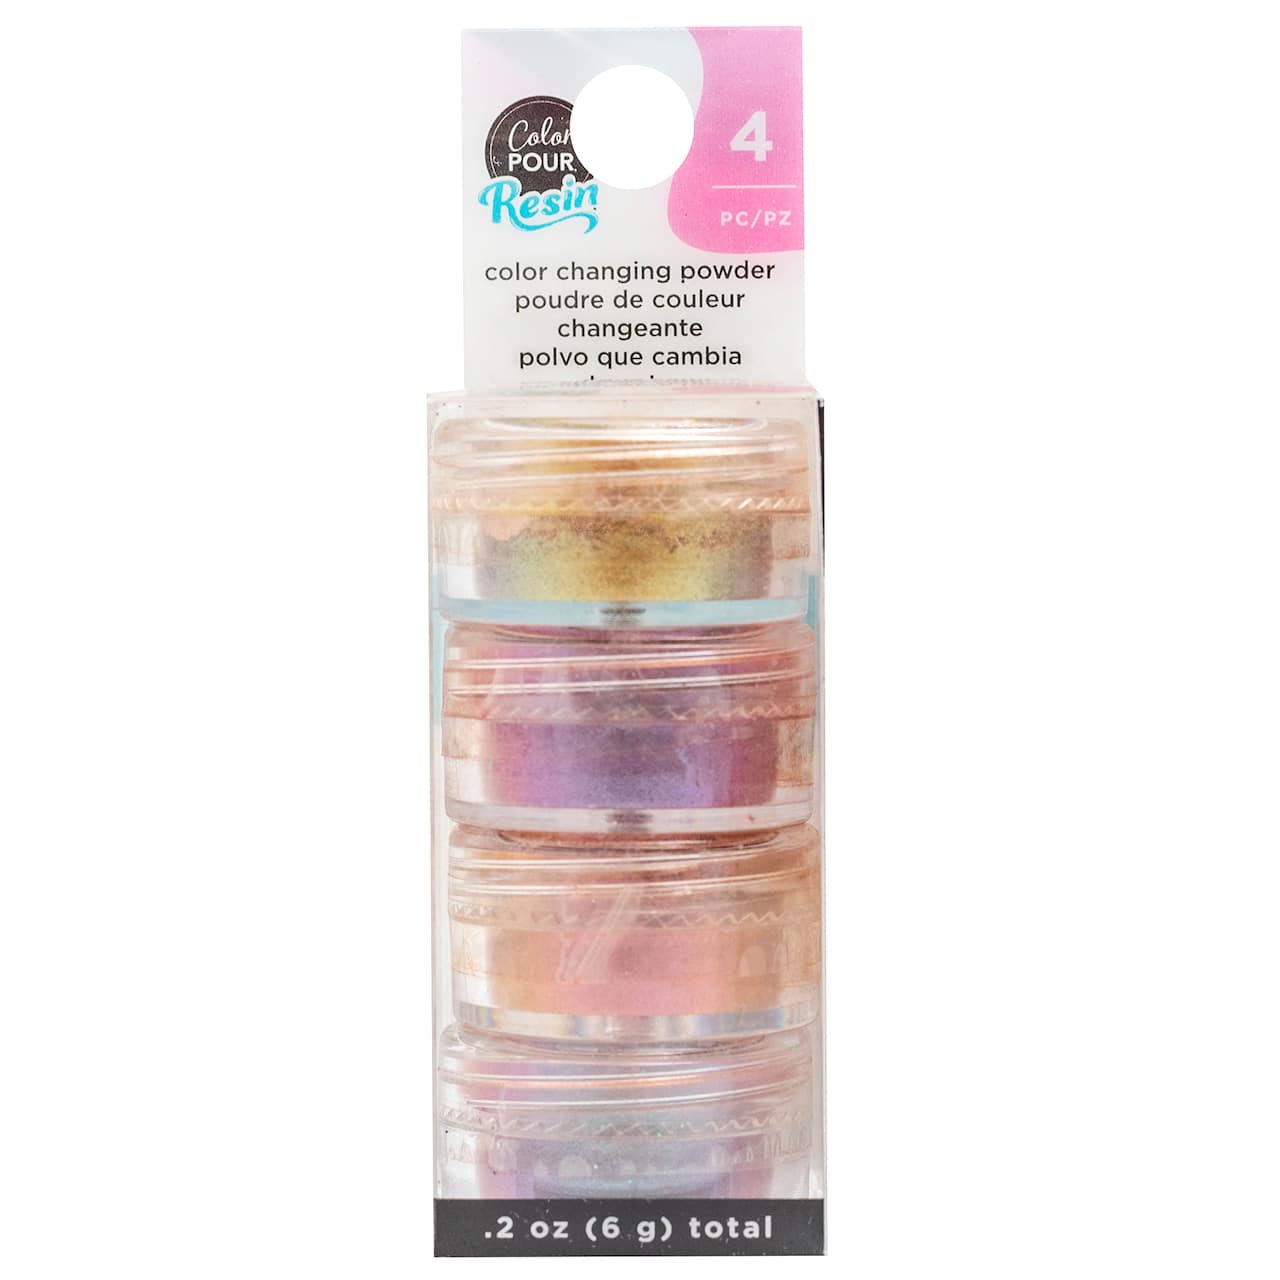 American Crafts™ Color Pour Resin Color Changing Powder